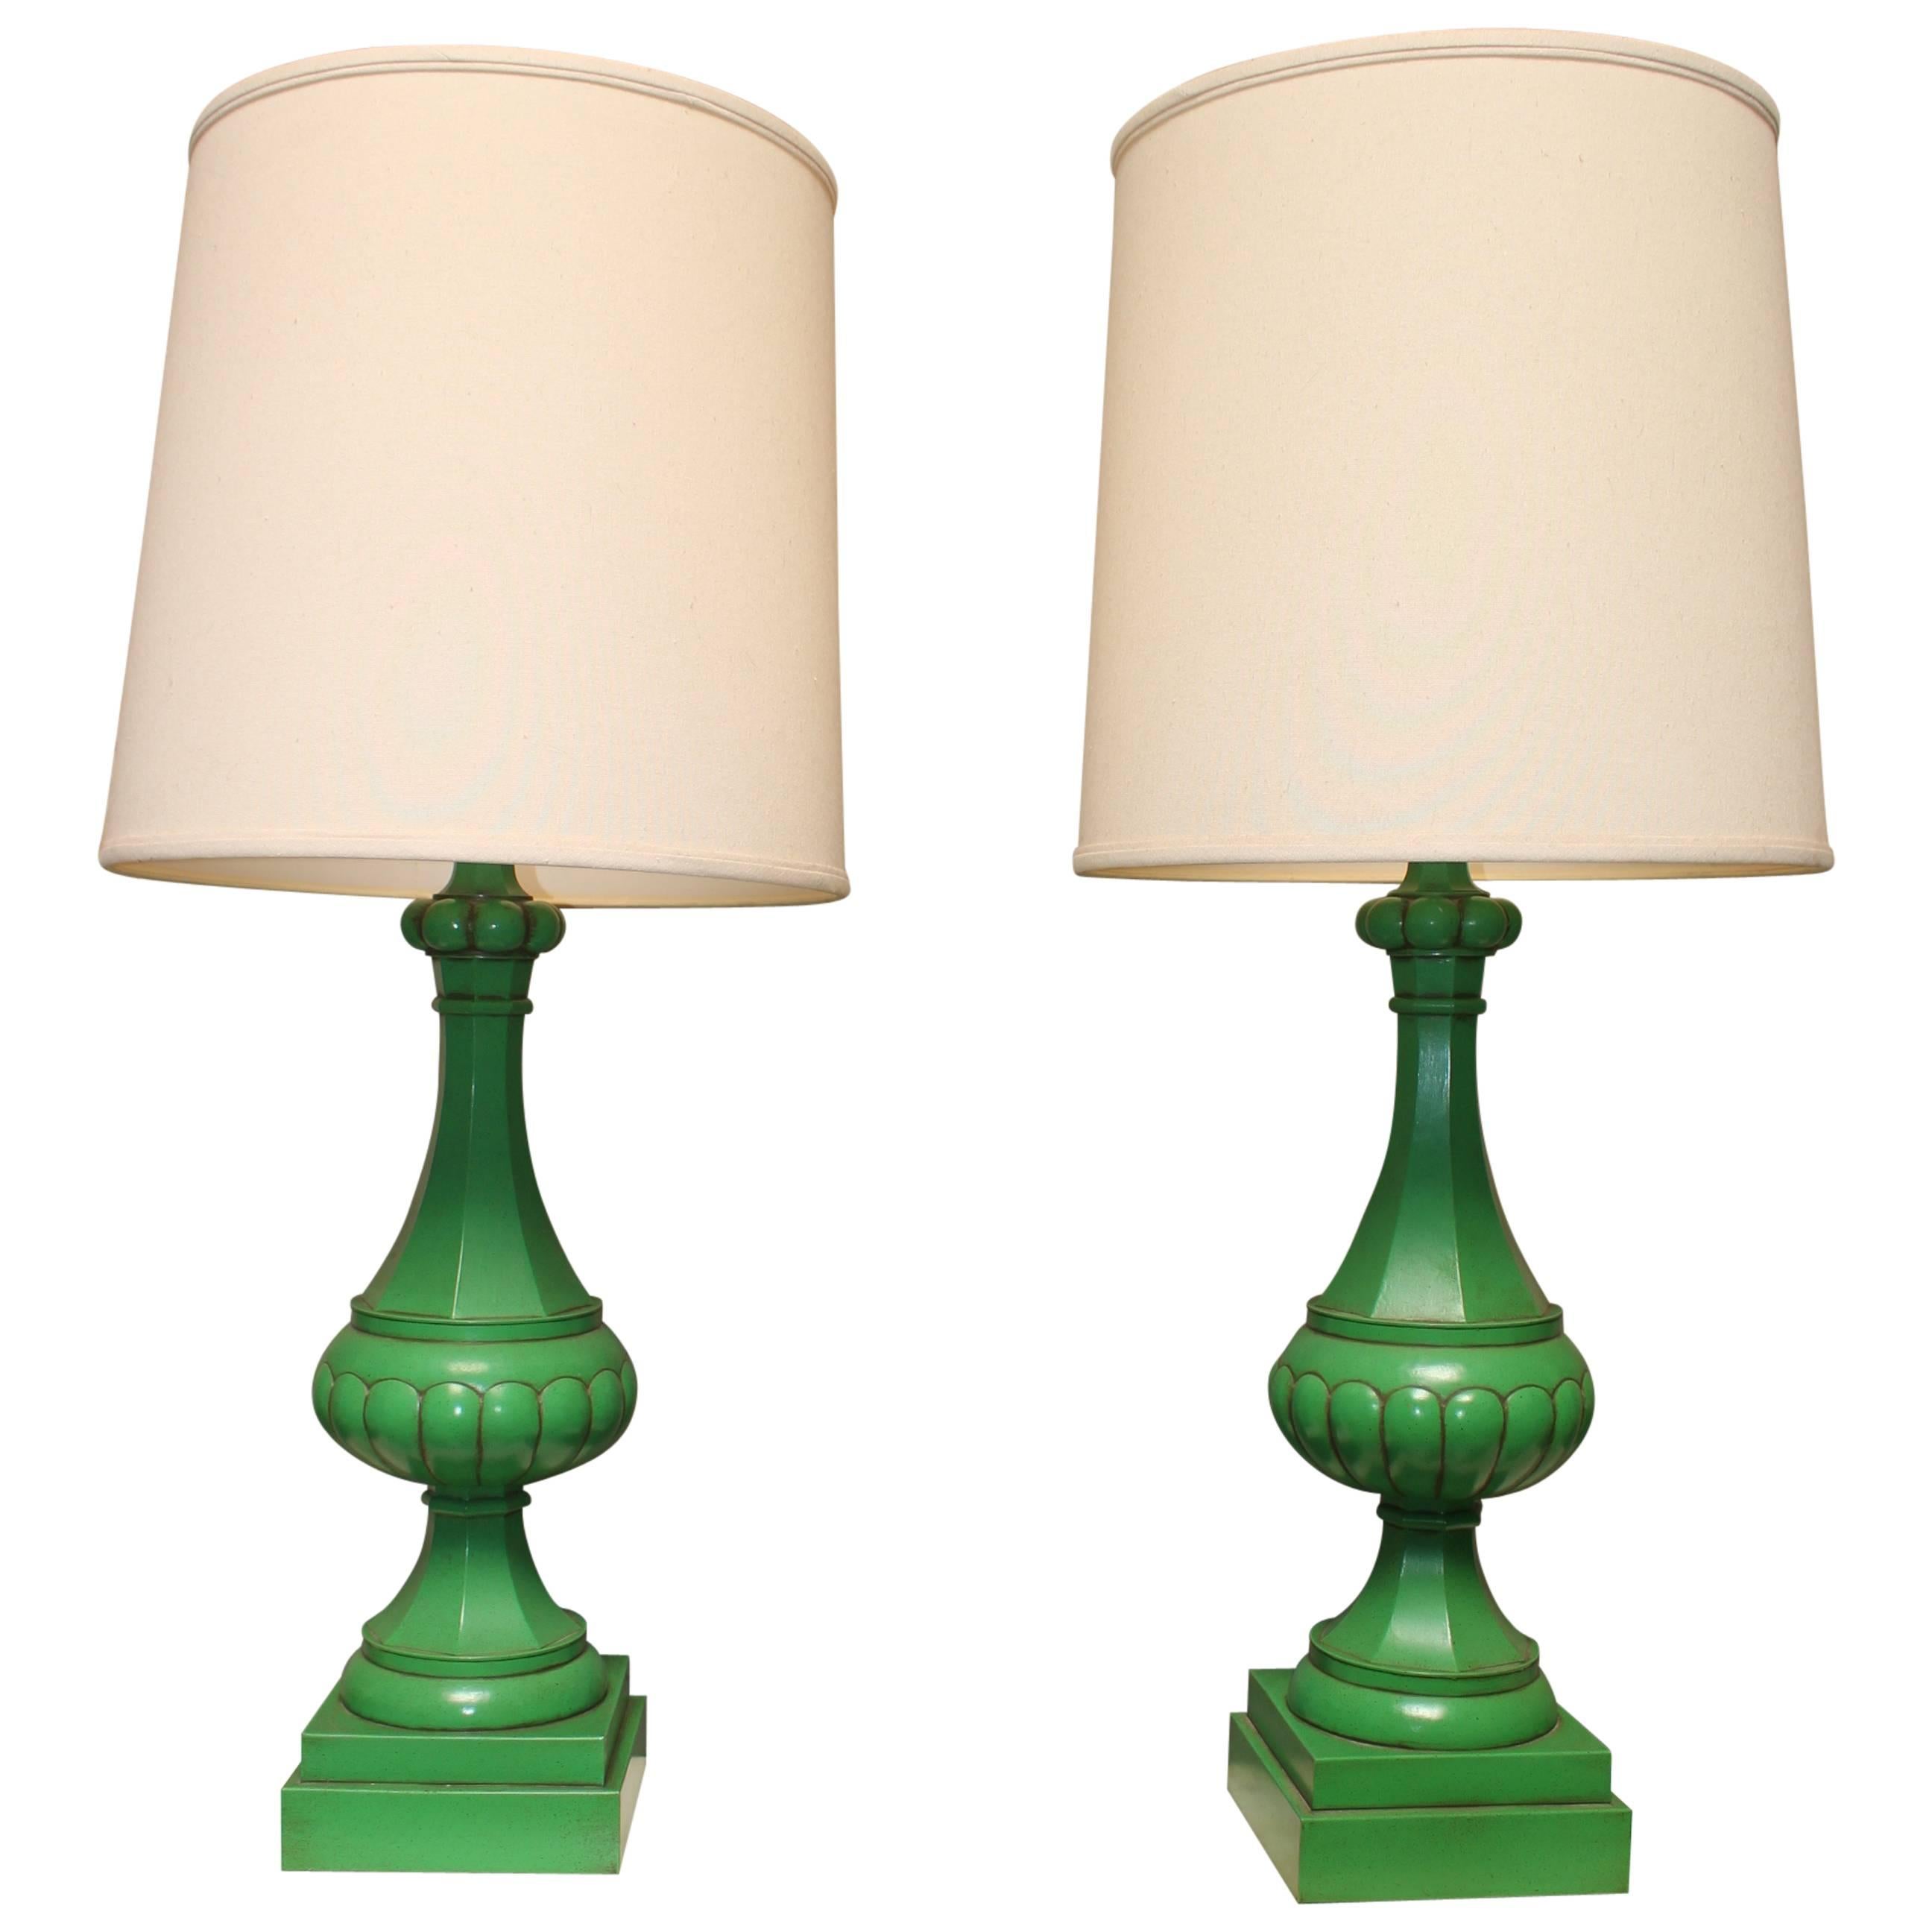 A Pair Of Italian Painted Tole Lamp Bases